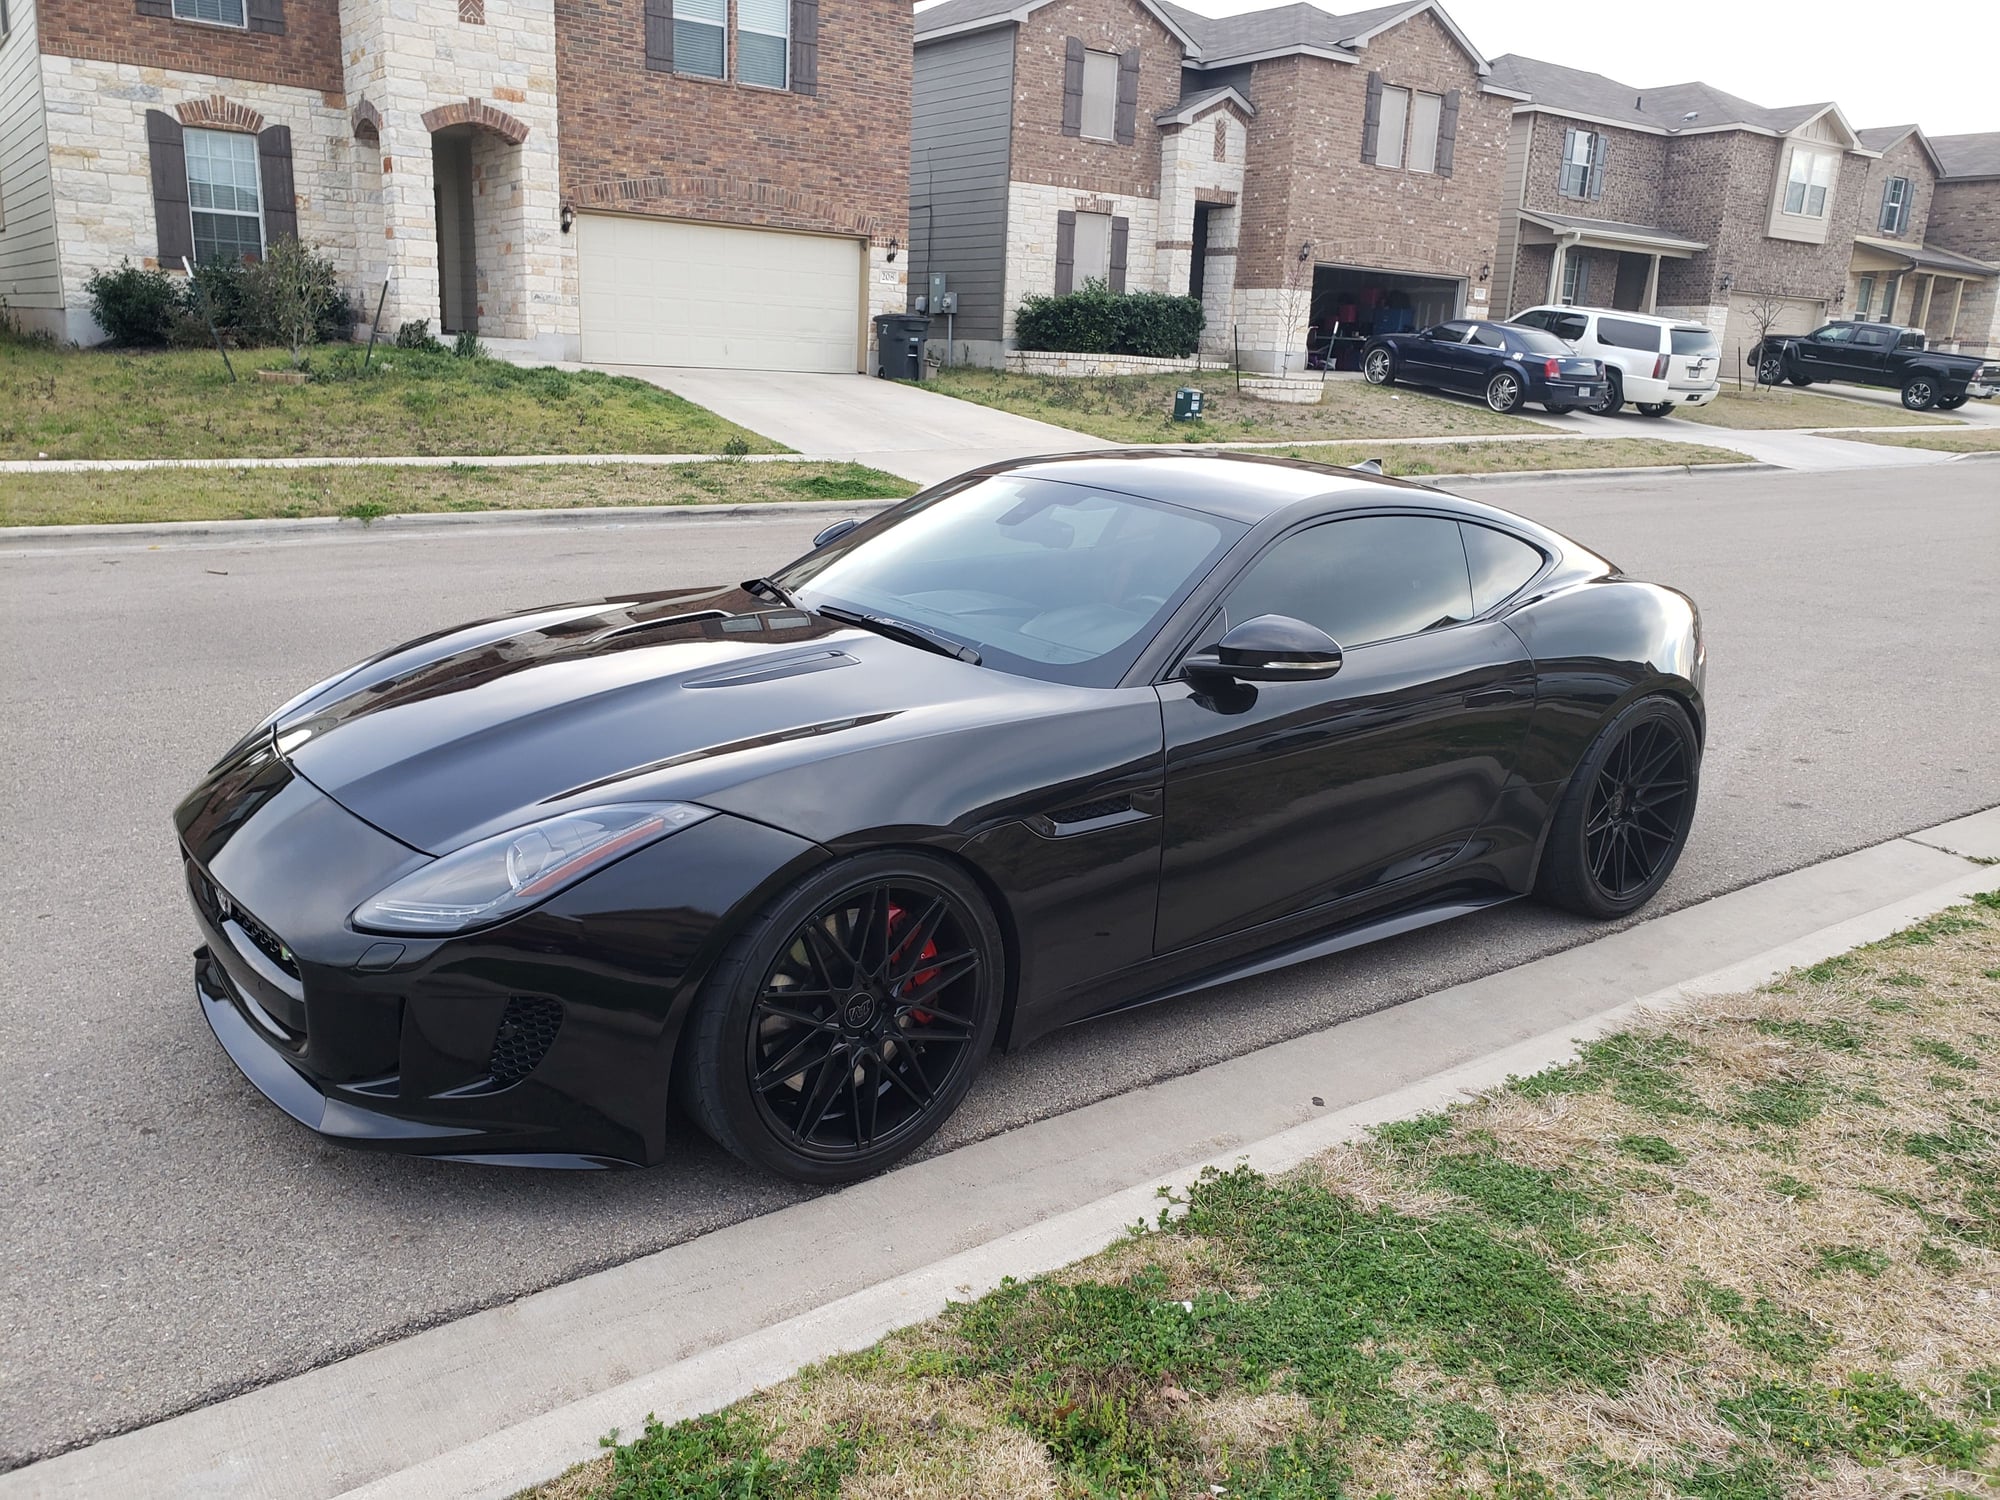 Wheels and Tires/Axles - Axe 1av zx4 wheels - Used - 2014 to 2019 Jaguar F-Type - Killeen, TX 76542, United States